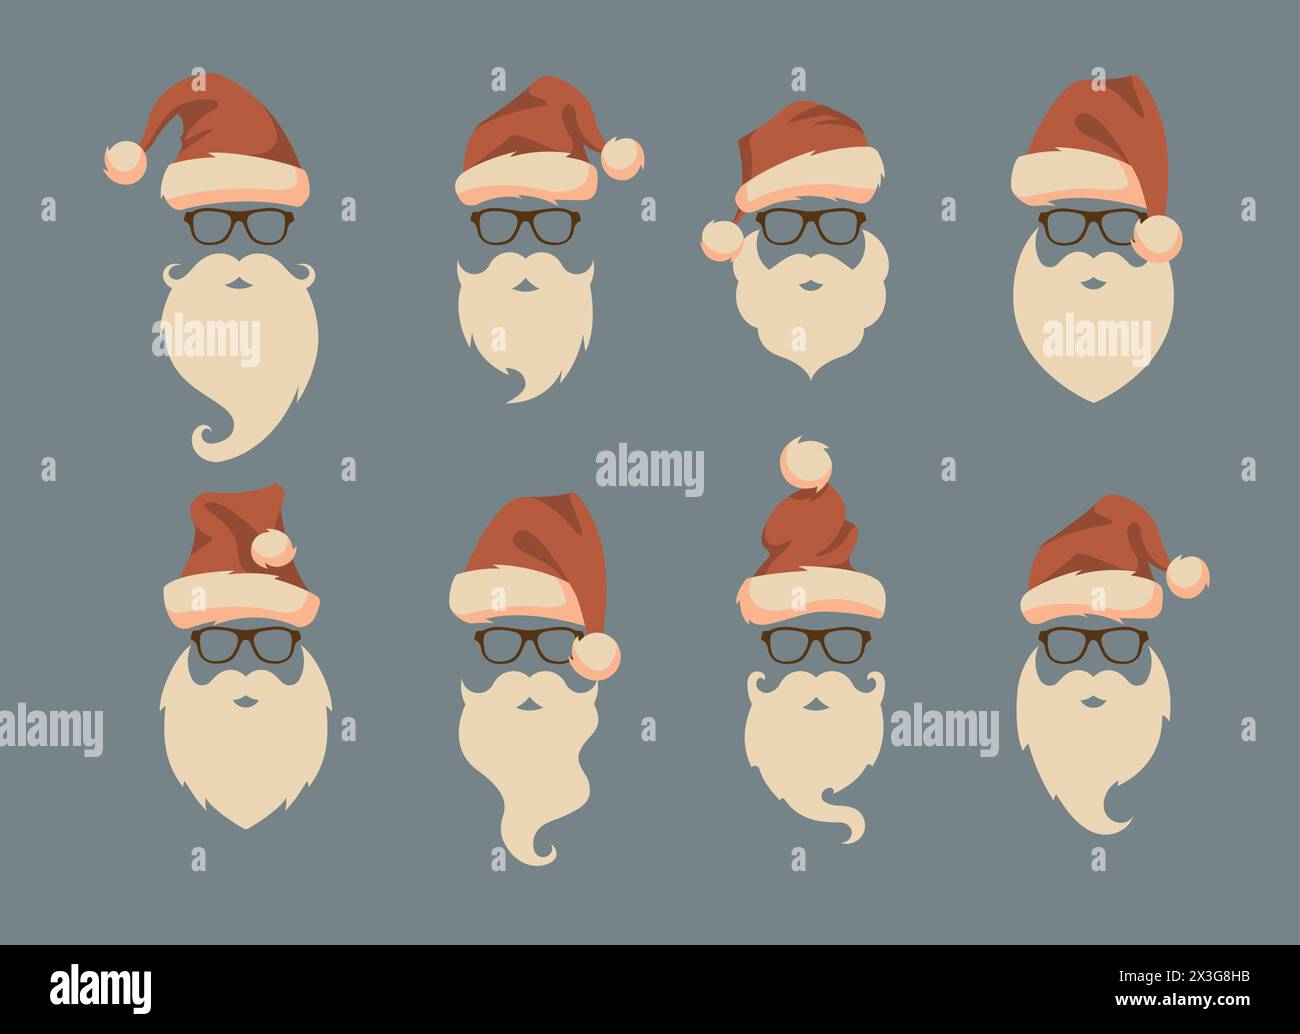 Vector set of faces with Santa hats, mustache and beards. Christmas Santa design elements. Holiday icons Stock Vector